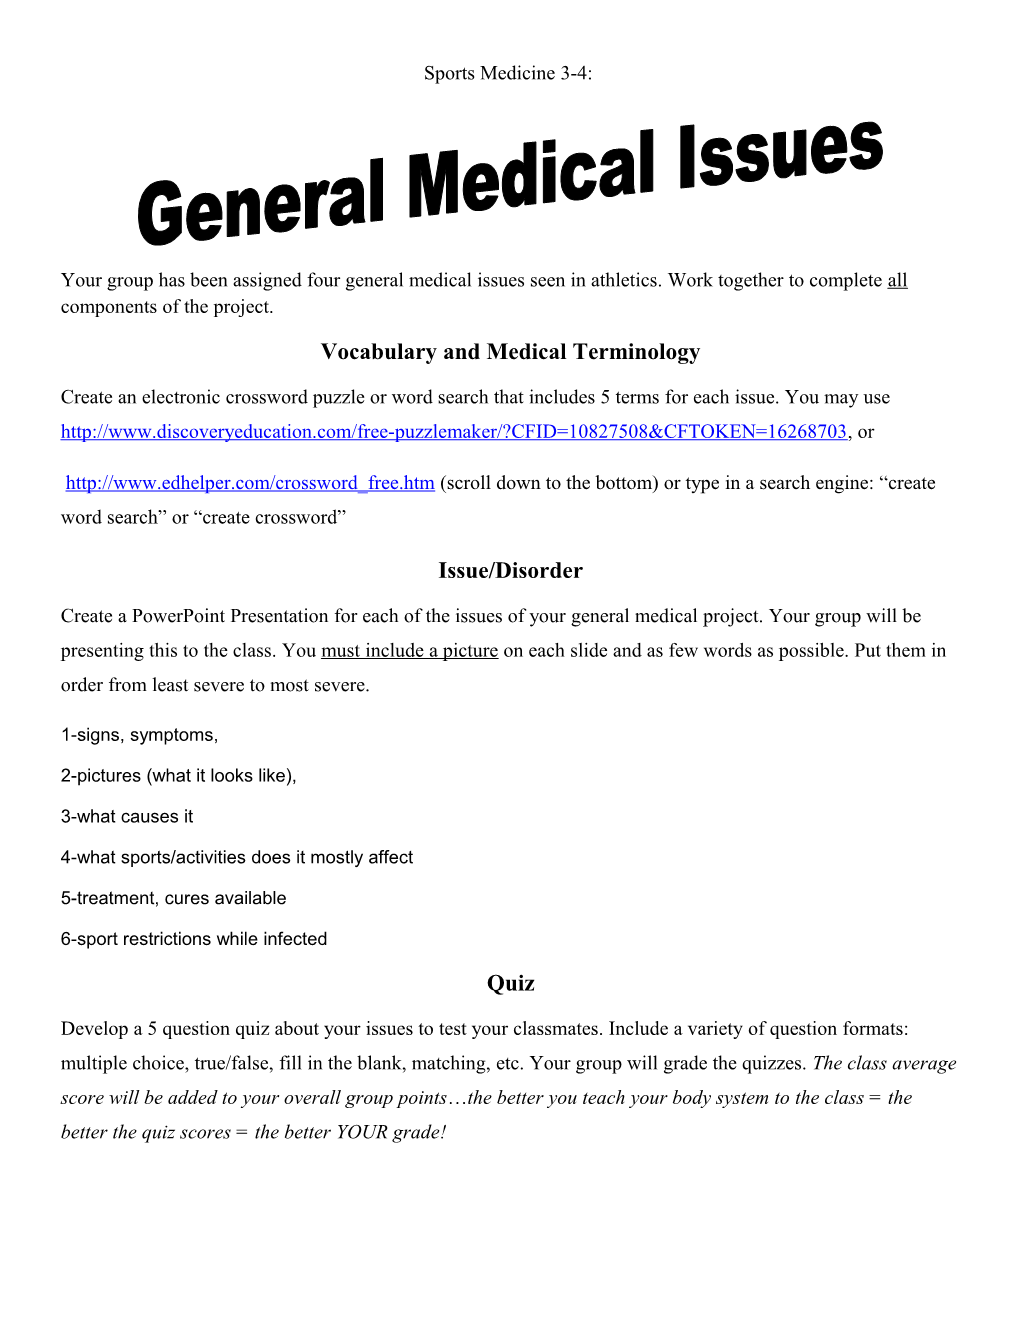 Vocabulary and Medical Terminology